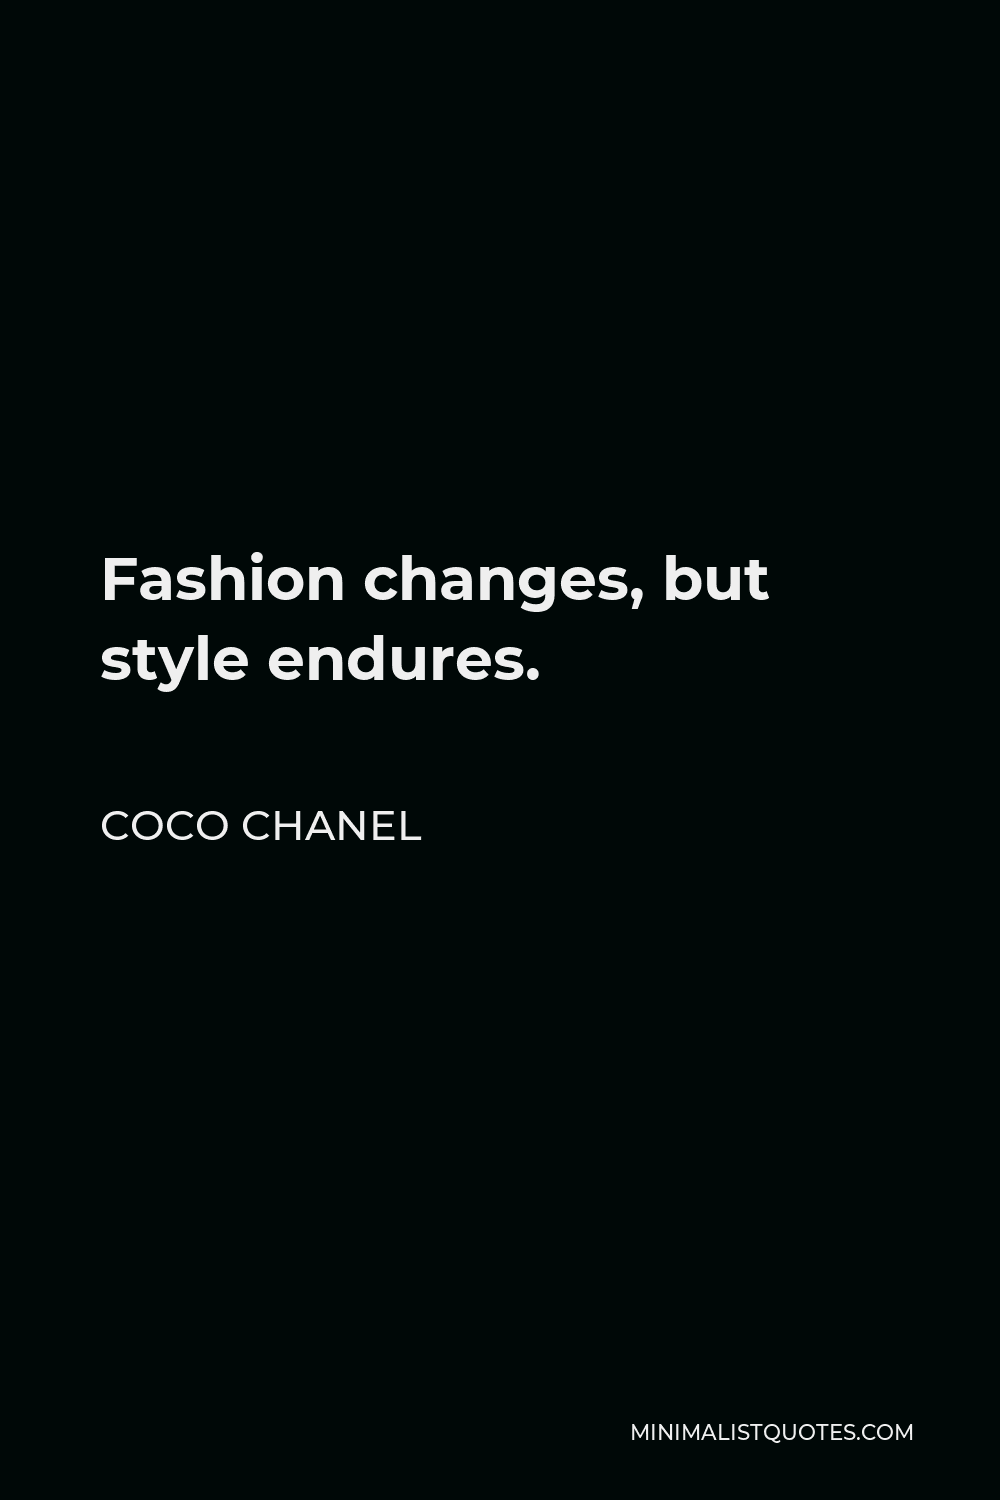 25 Of The Best Coco Chanel Quotes On Fashion and True Style   Inspirationfeed